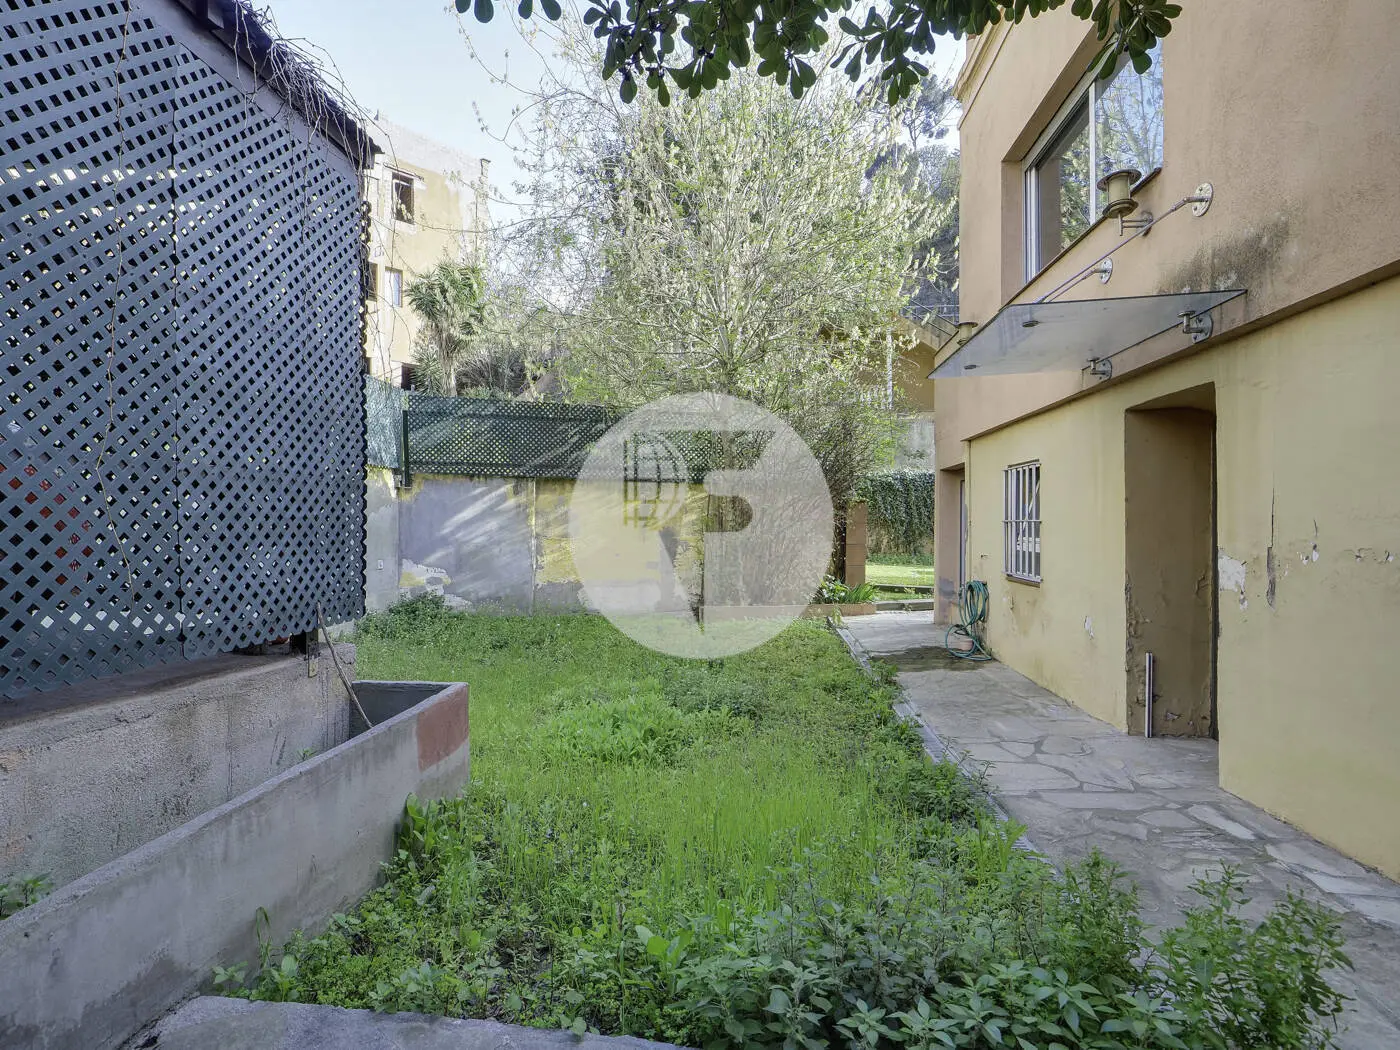 Fantastic 185m² house with garden and terrace in the Sarrià neighborhood of Barcelona